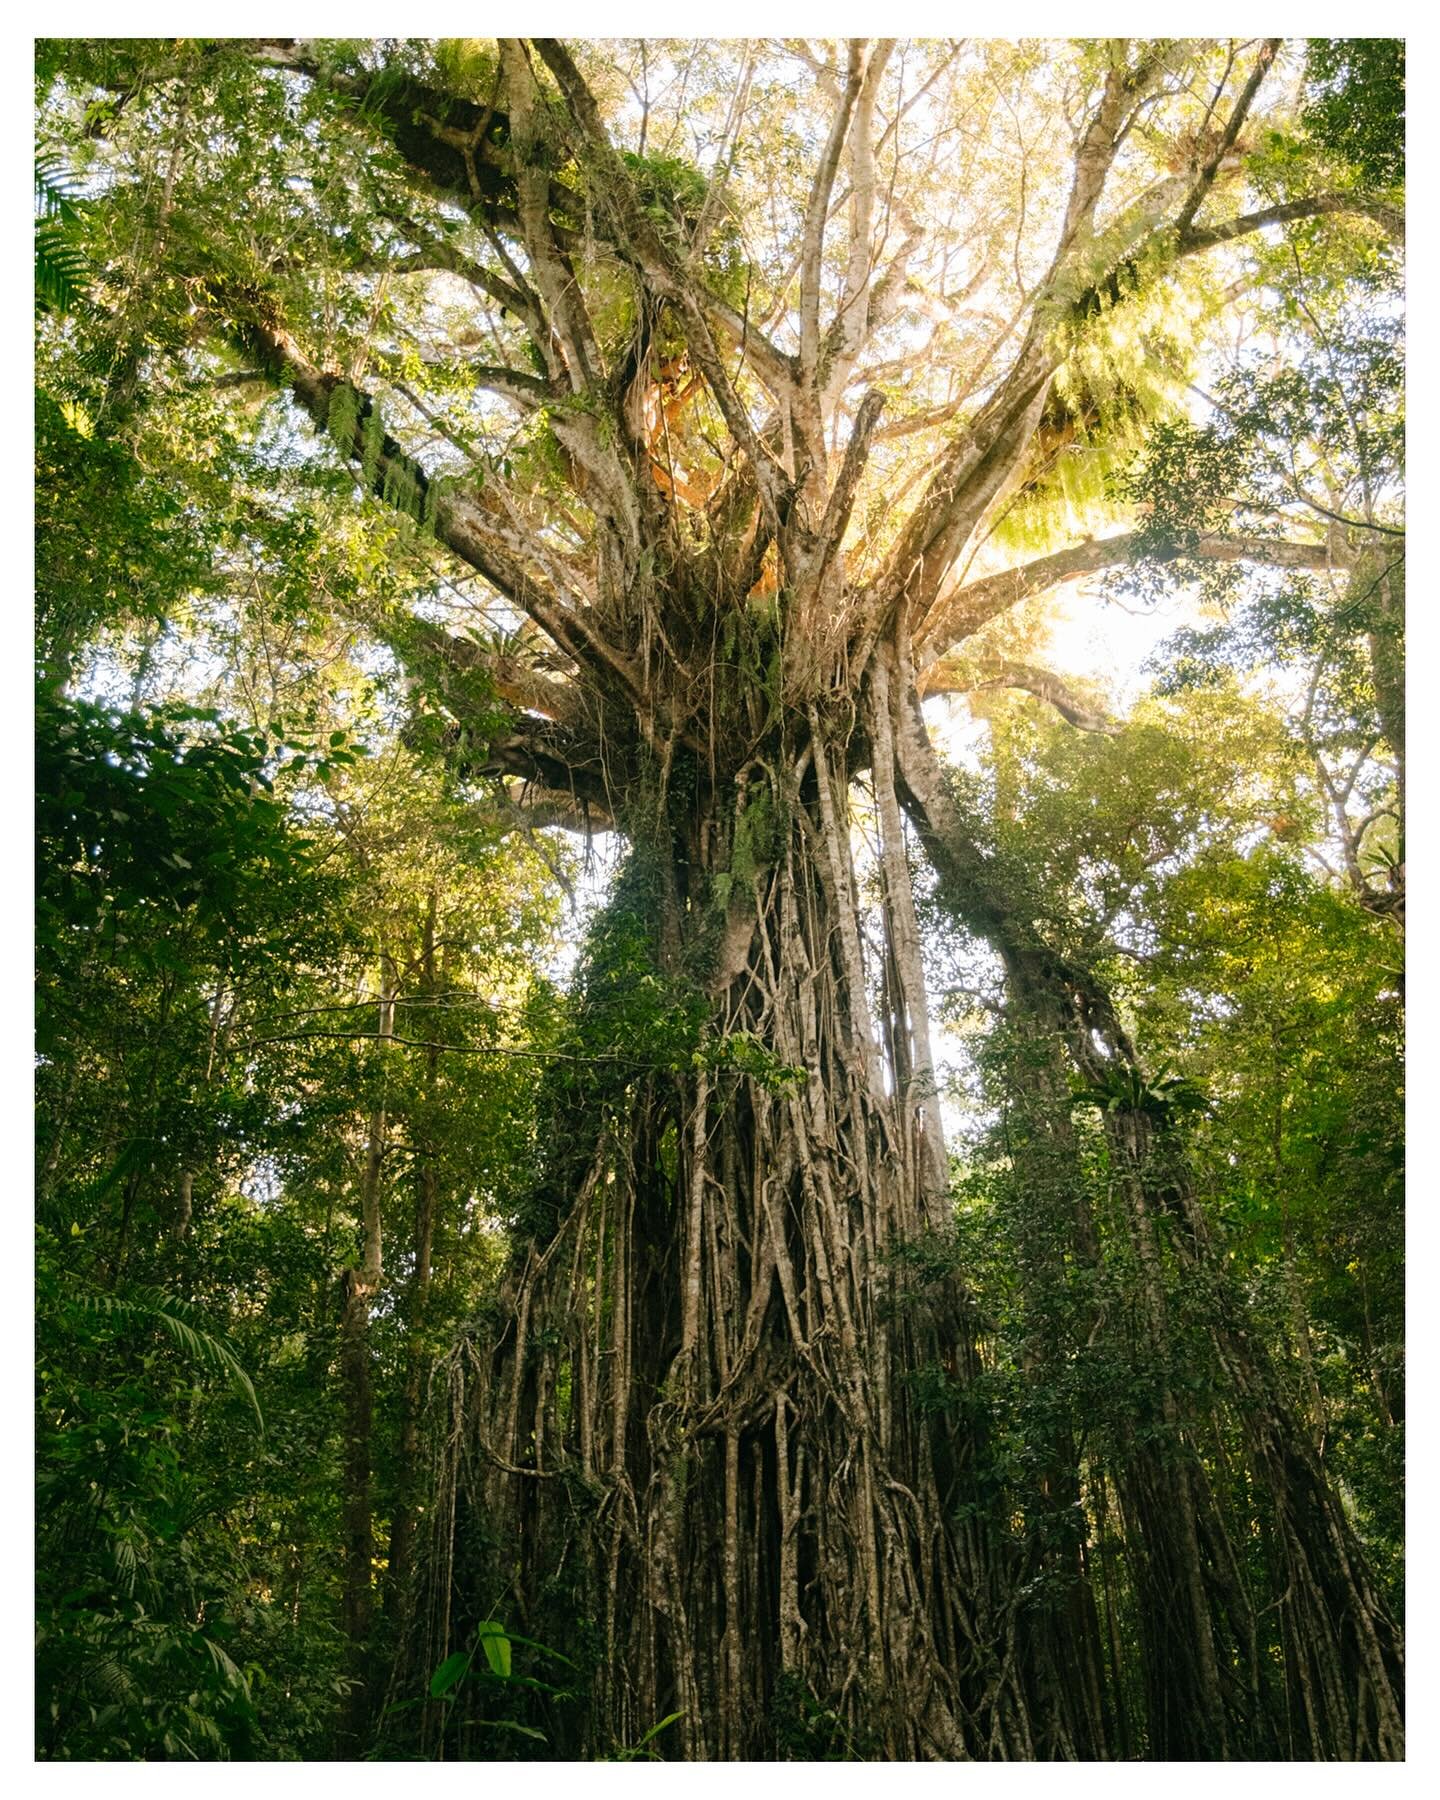 The Cathedral Tree | Queensland, Australia
While looking for camp one evening, we saw a point of interest for a tree out in the middle of nowhere while scrubbing the map. Camp could wait, we needed to meet this tree. After a short hike into forrest, 